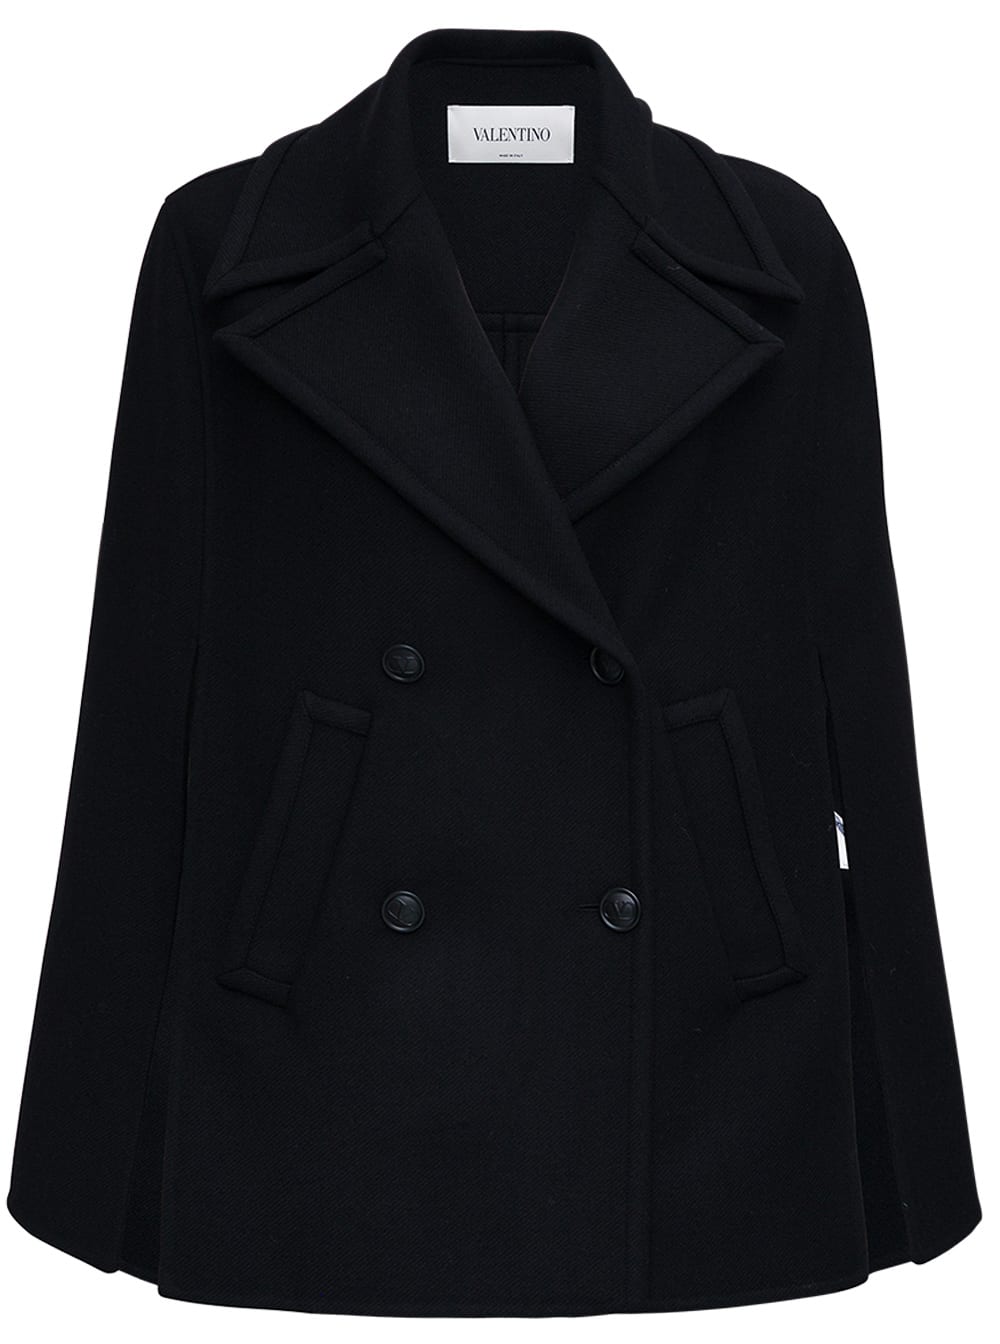 Valentino Double-breasted Technical Wool Black Cape